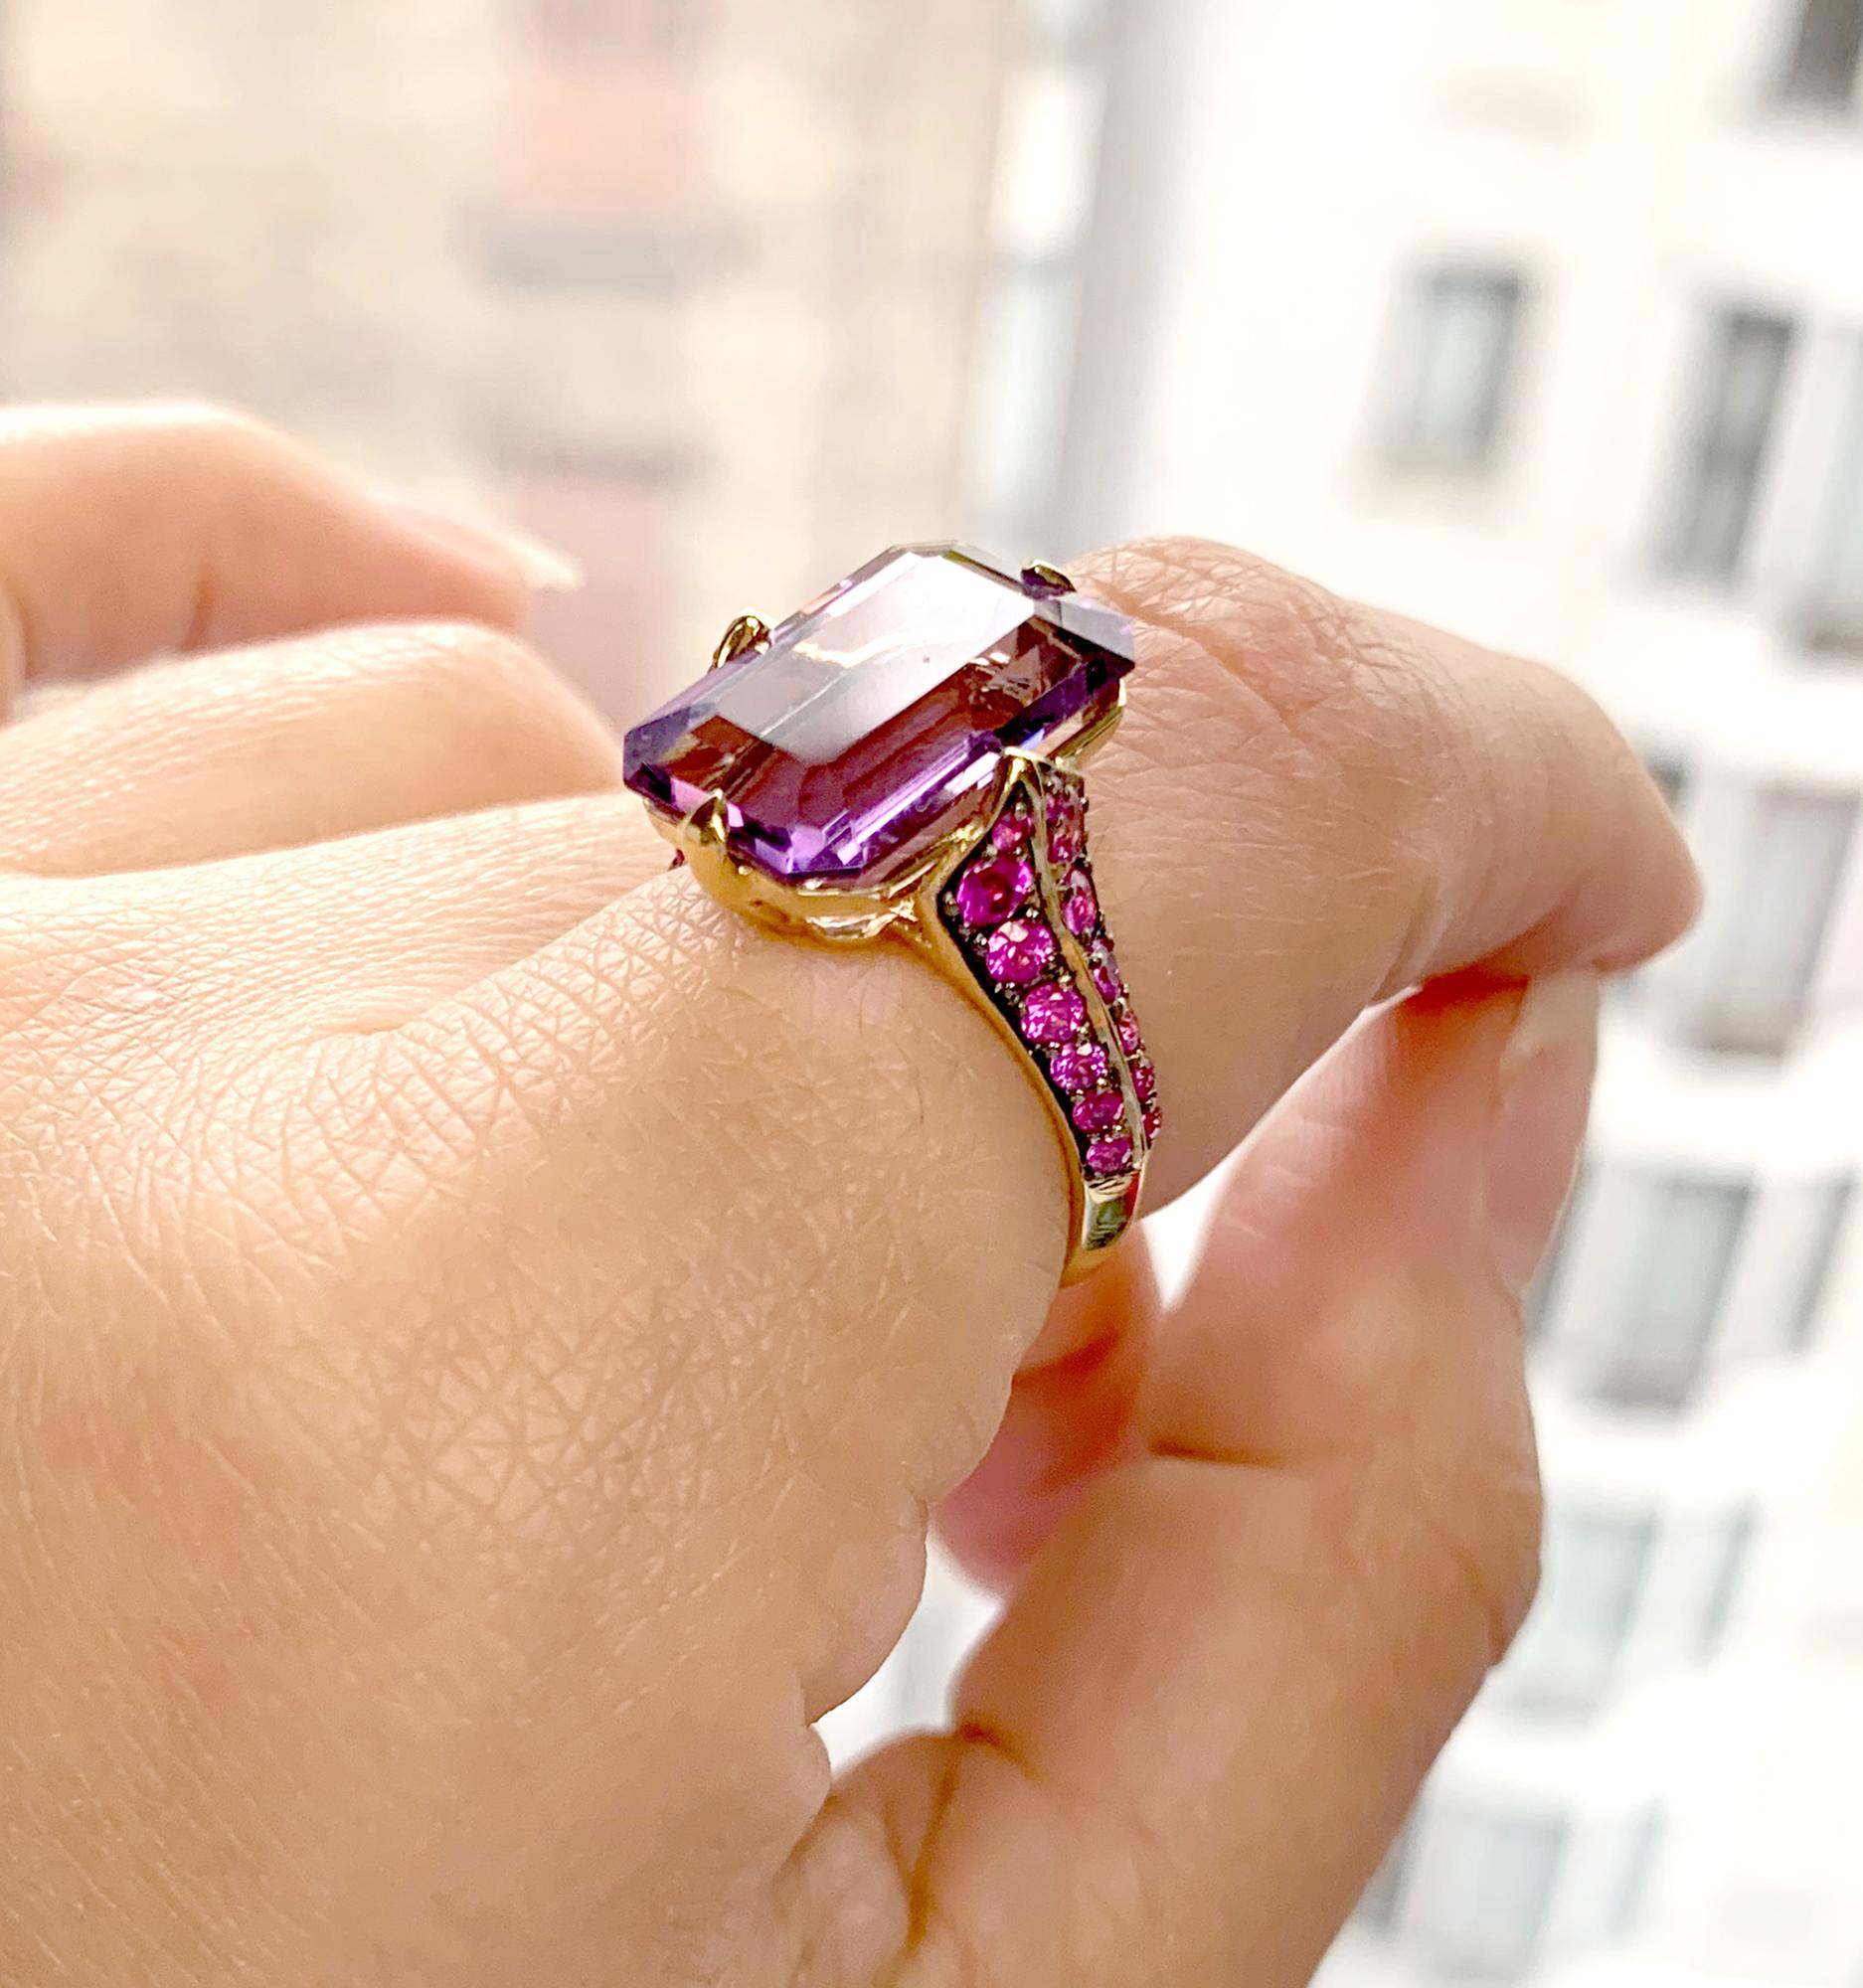 Amethyst & Pink Sapphire Ring in 18K Yellow Gold, from 'Rain Forest' Collection.
Please allow 4-5 weeks for this item to be delivered.

Stone Size: 15 x 10 mm